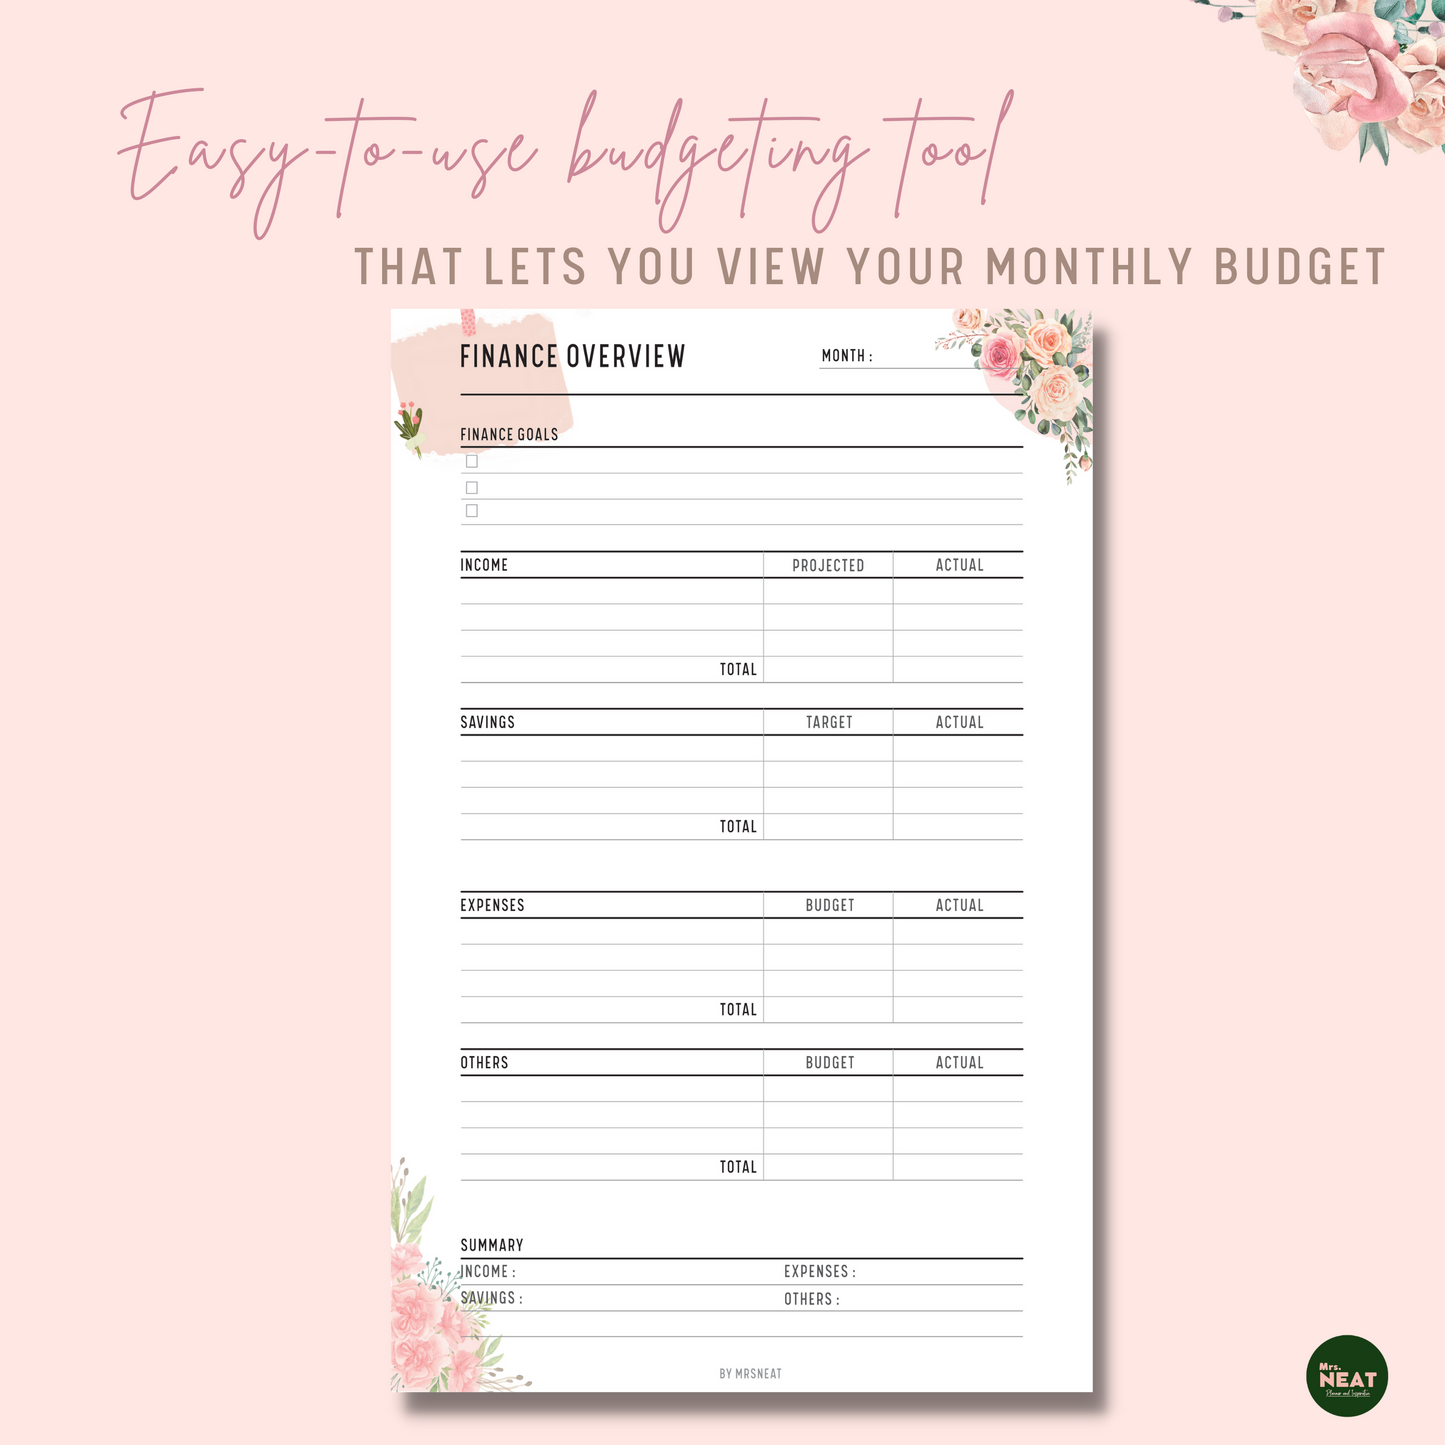 Cute Floral Finance Overview with room for financial goals, Projected and actual income, savings, expense, and summary